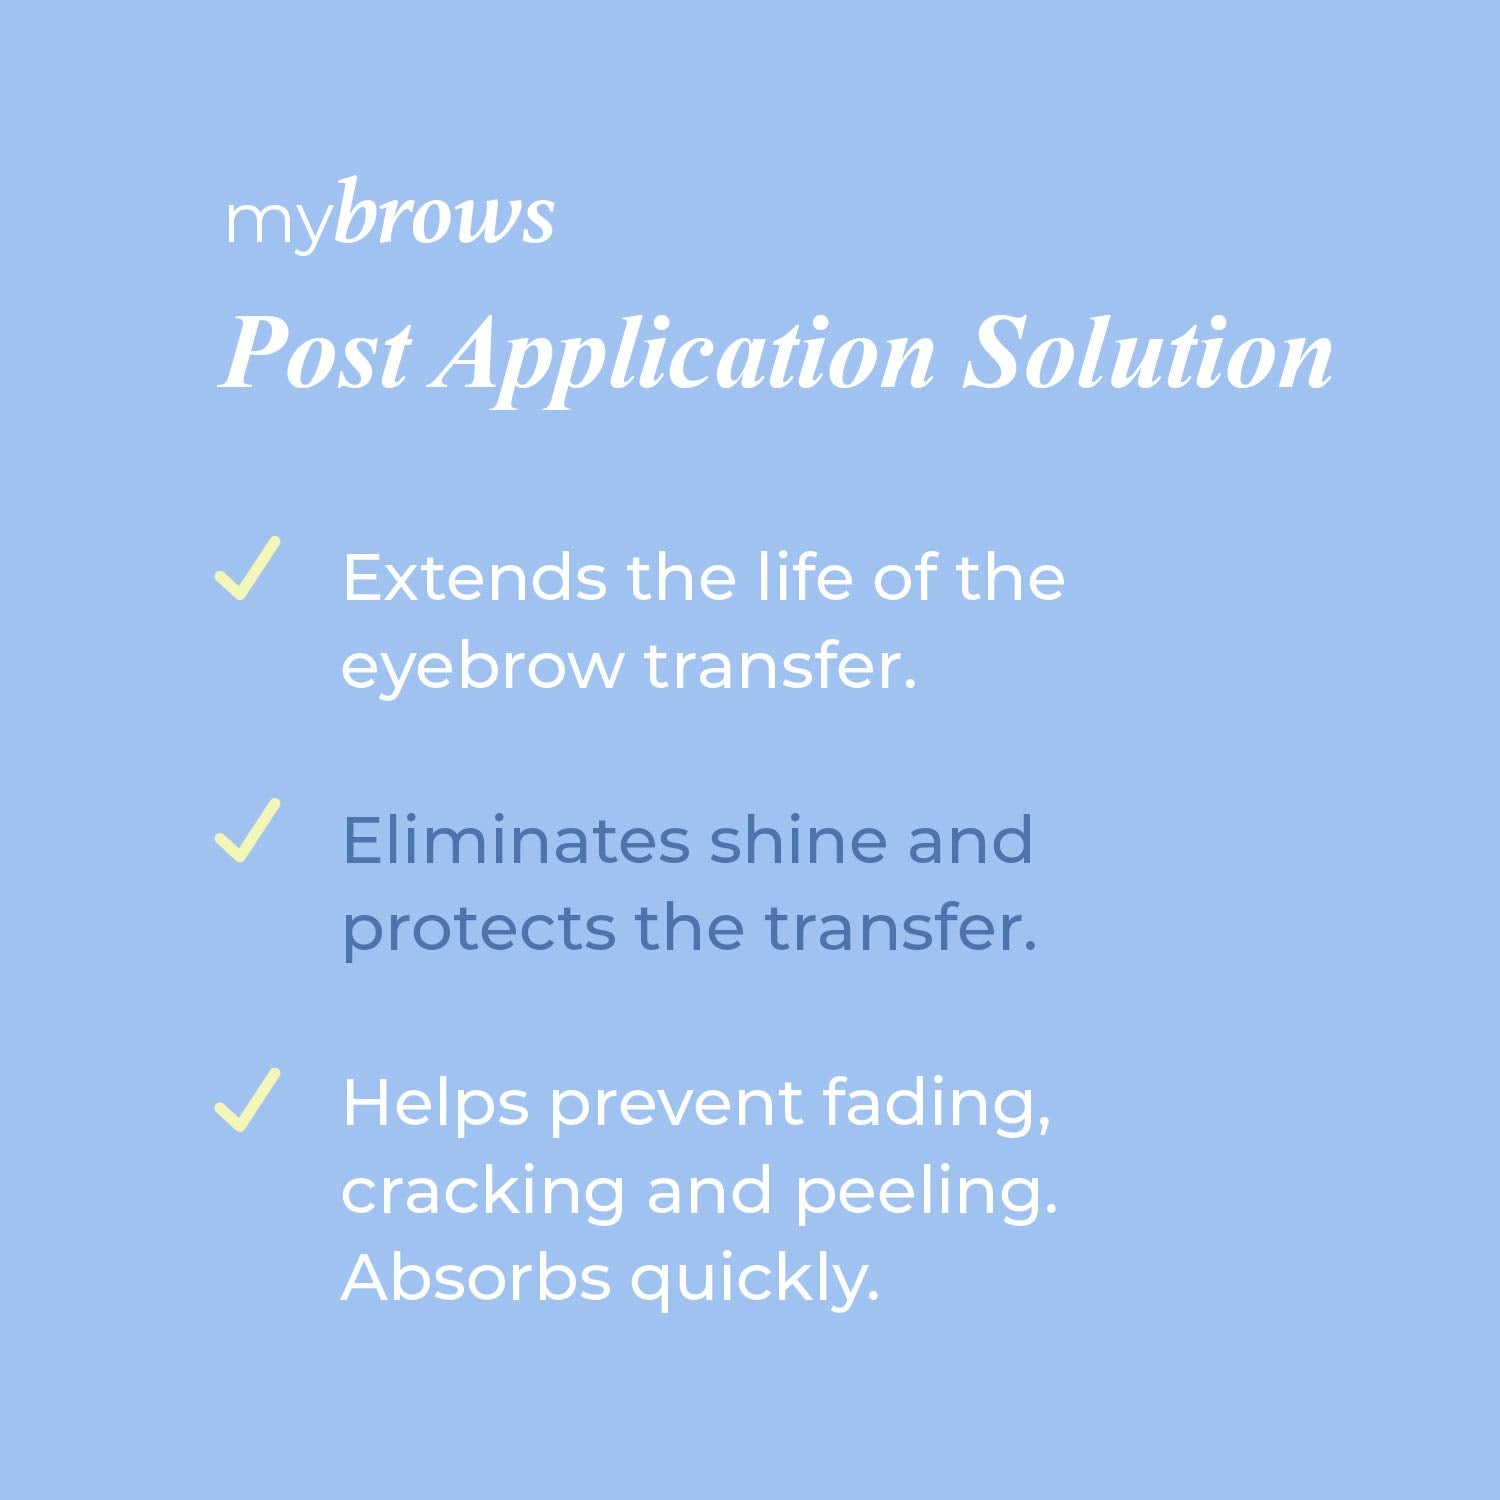 MYBROWS POST APPLICATION SOLUTION TO EXTEND THE LIFE AND REMOVE SHINE FOR TEMPORARY TATTOOS